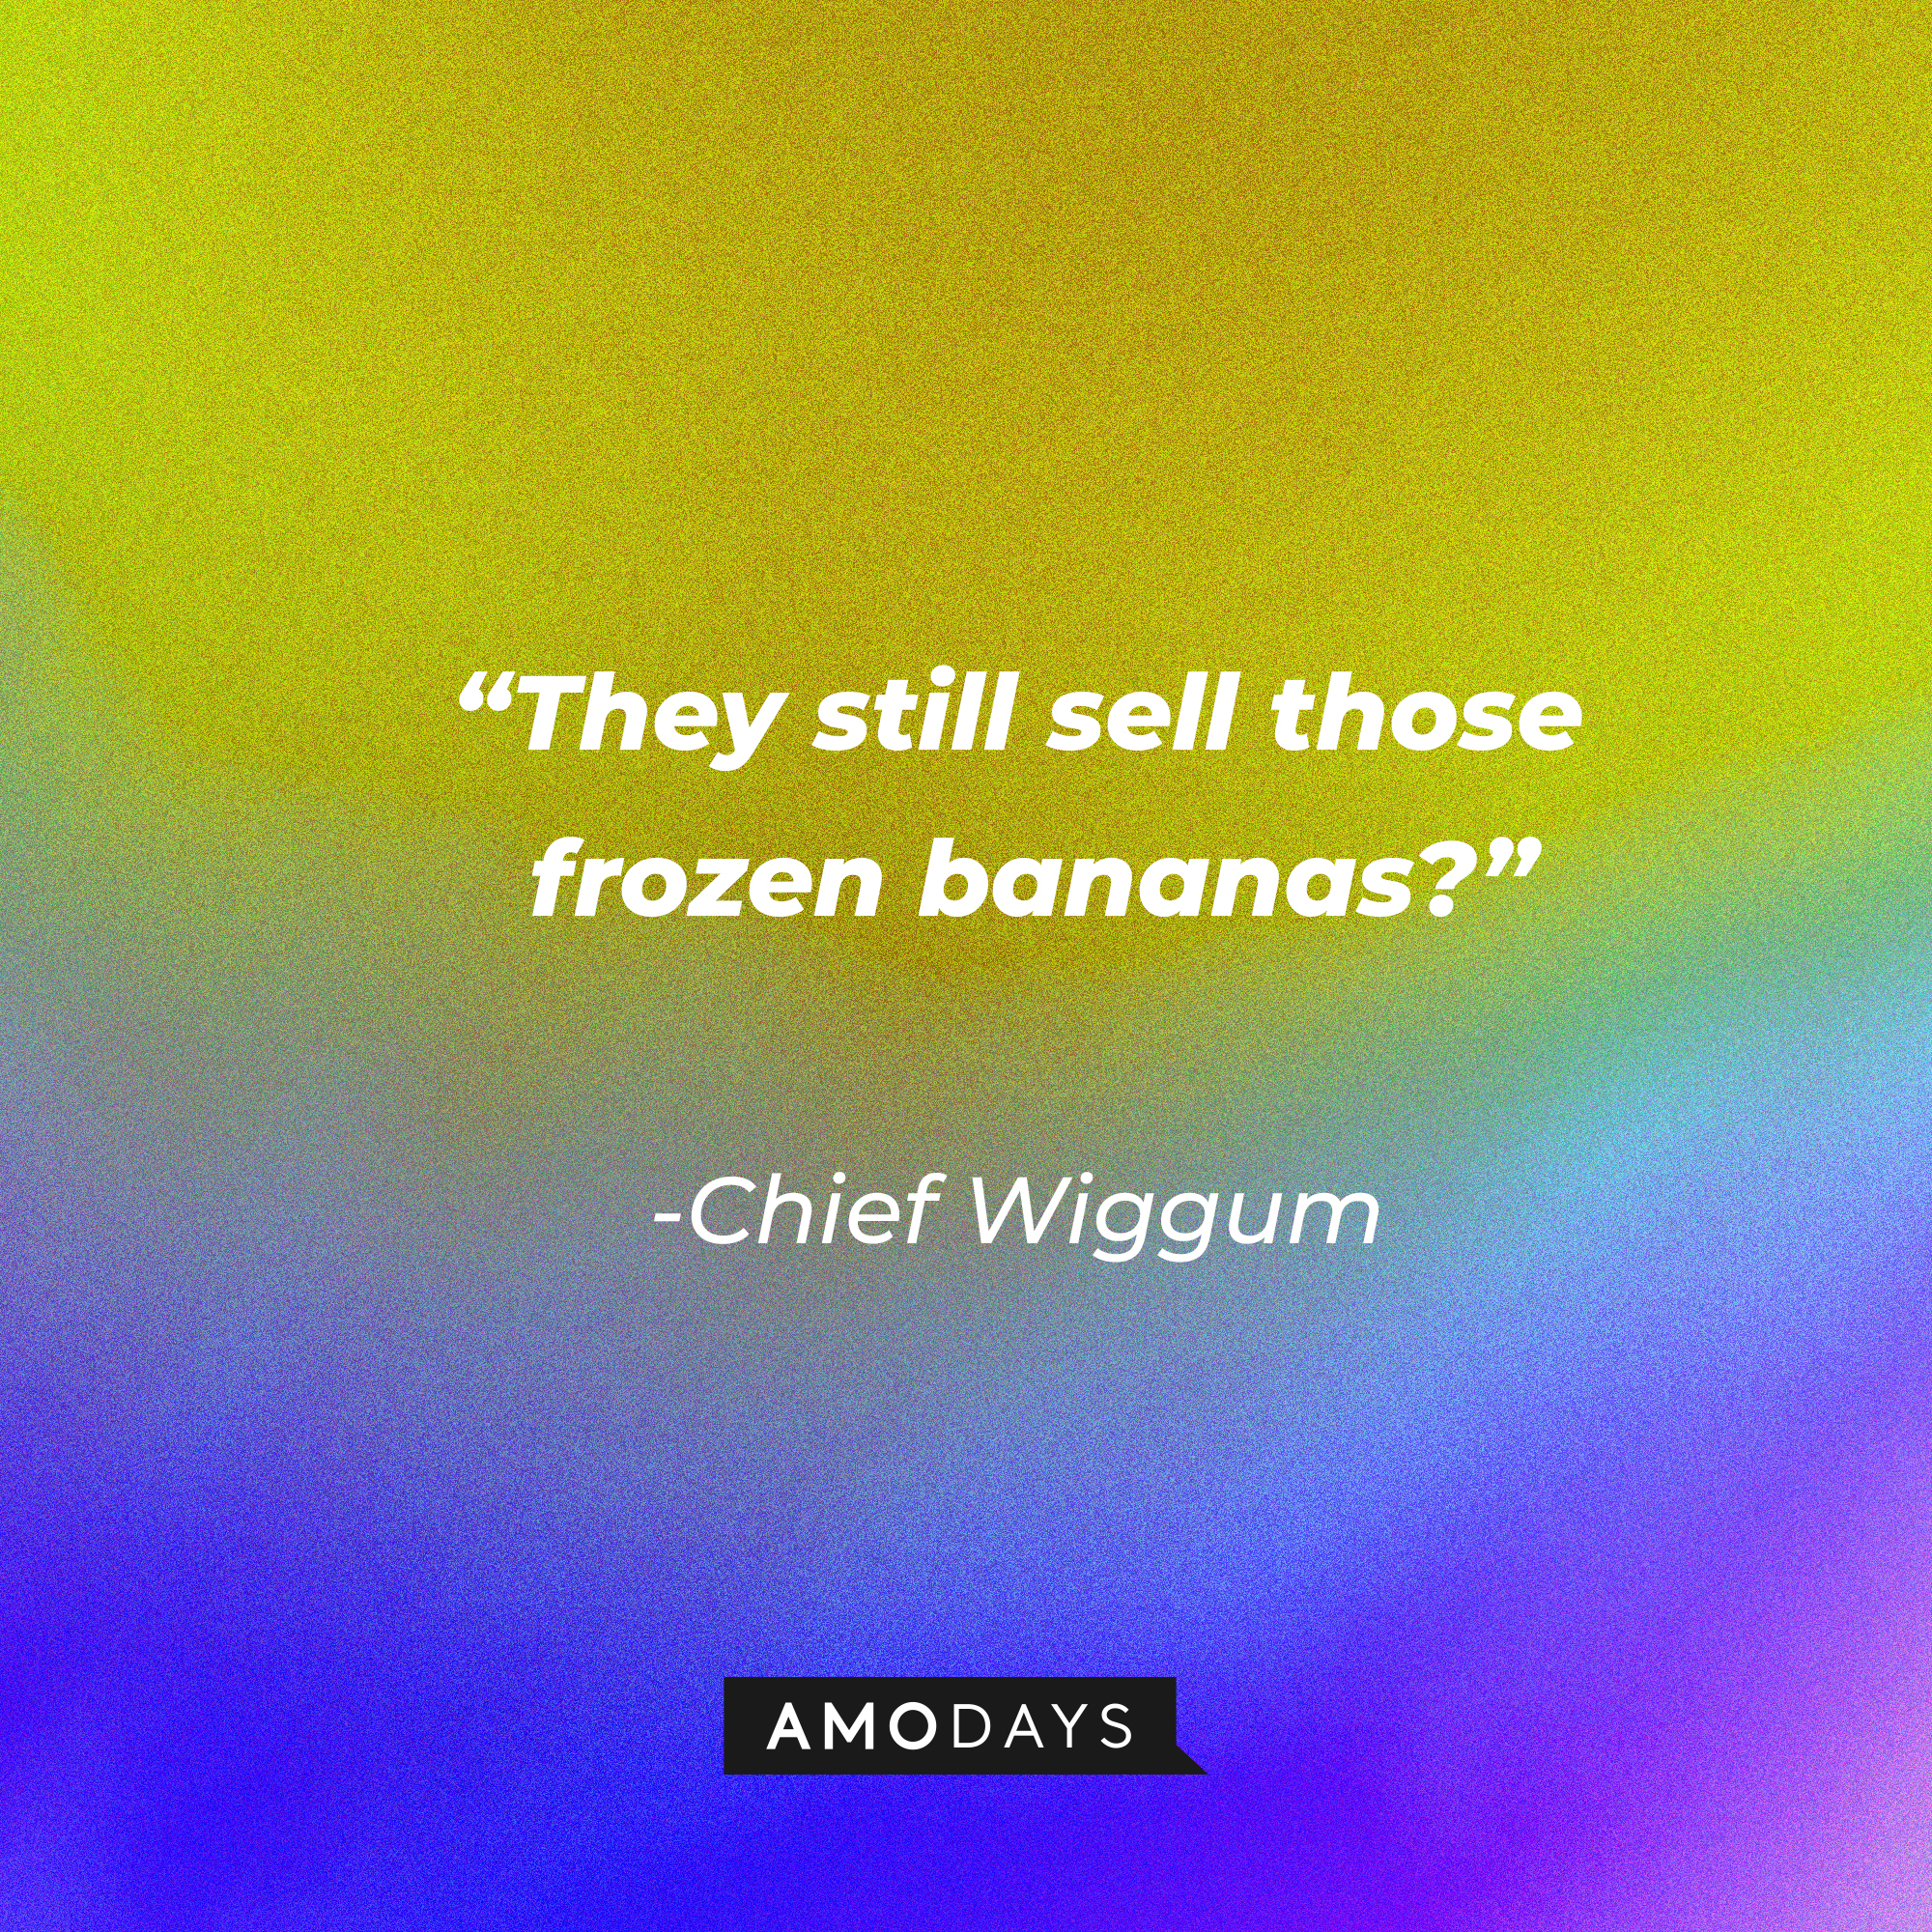 Chief Wiggum’s quote: “They still sell those frozen bananas?” | Source: Amodays